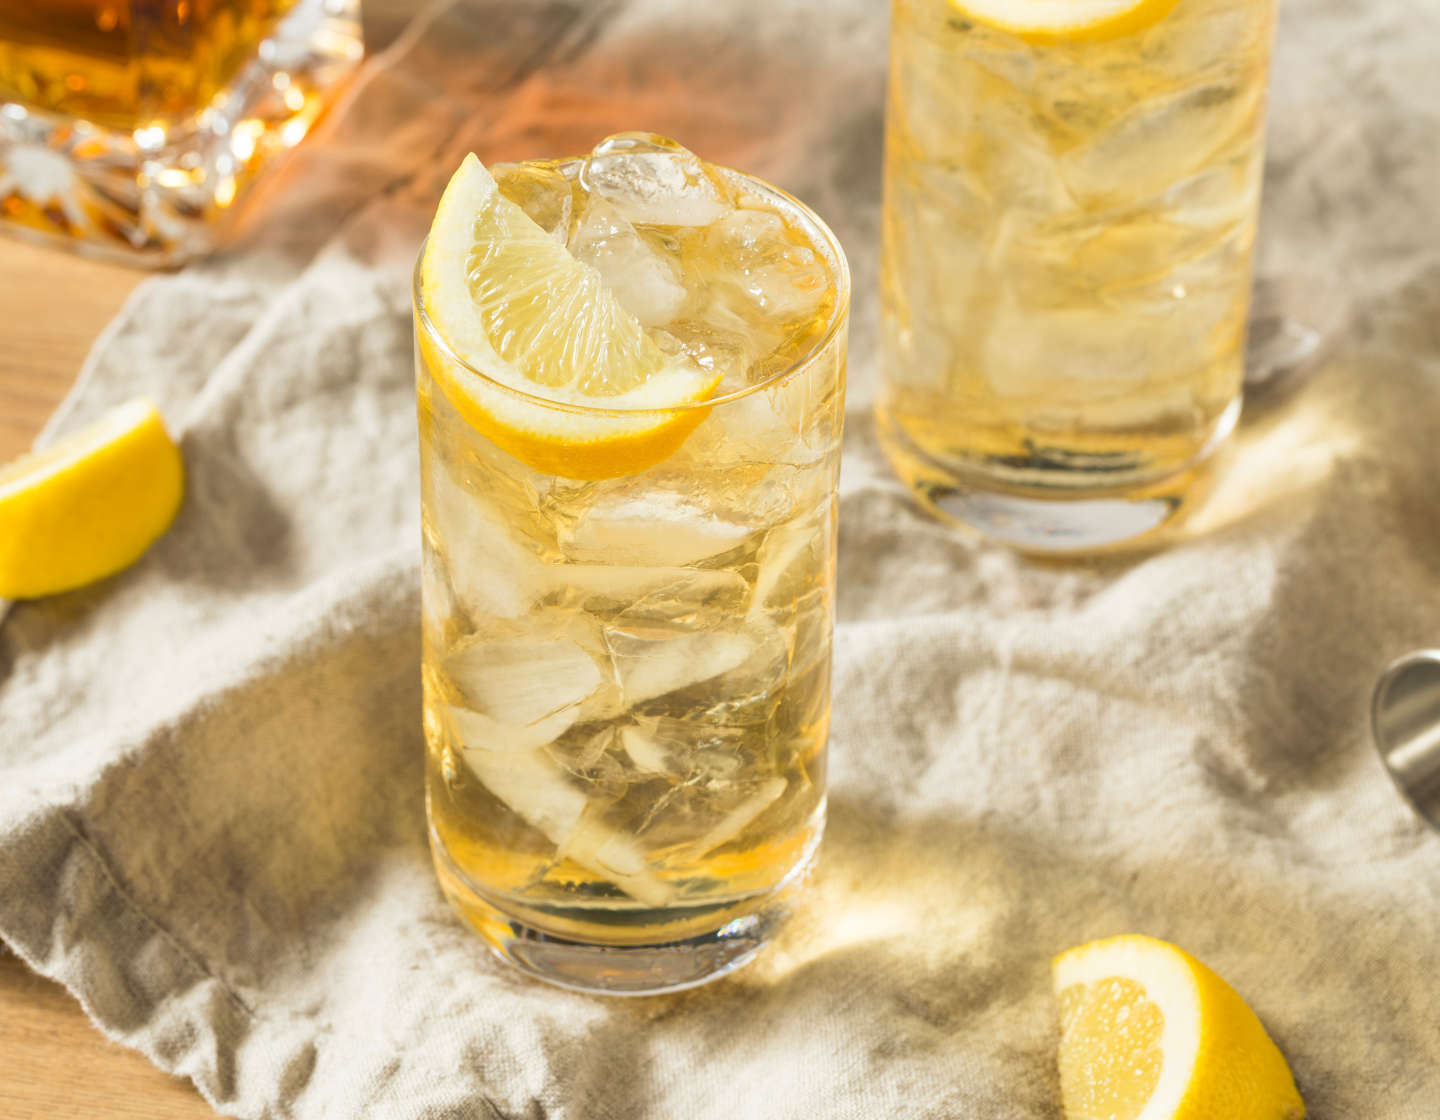 Johnnie Walker highball cocktail with lemon garnish and ice